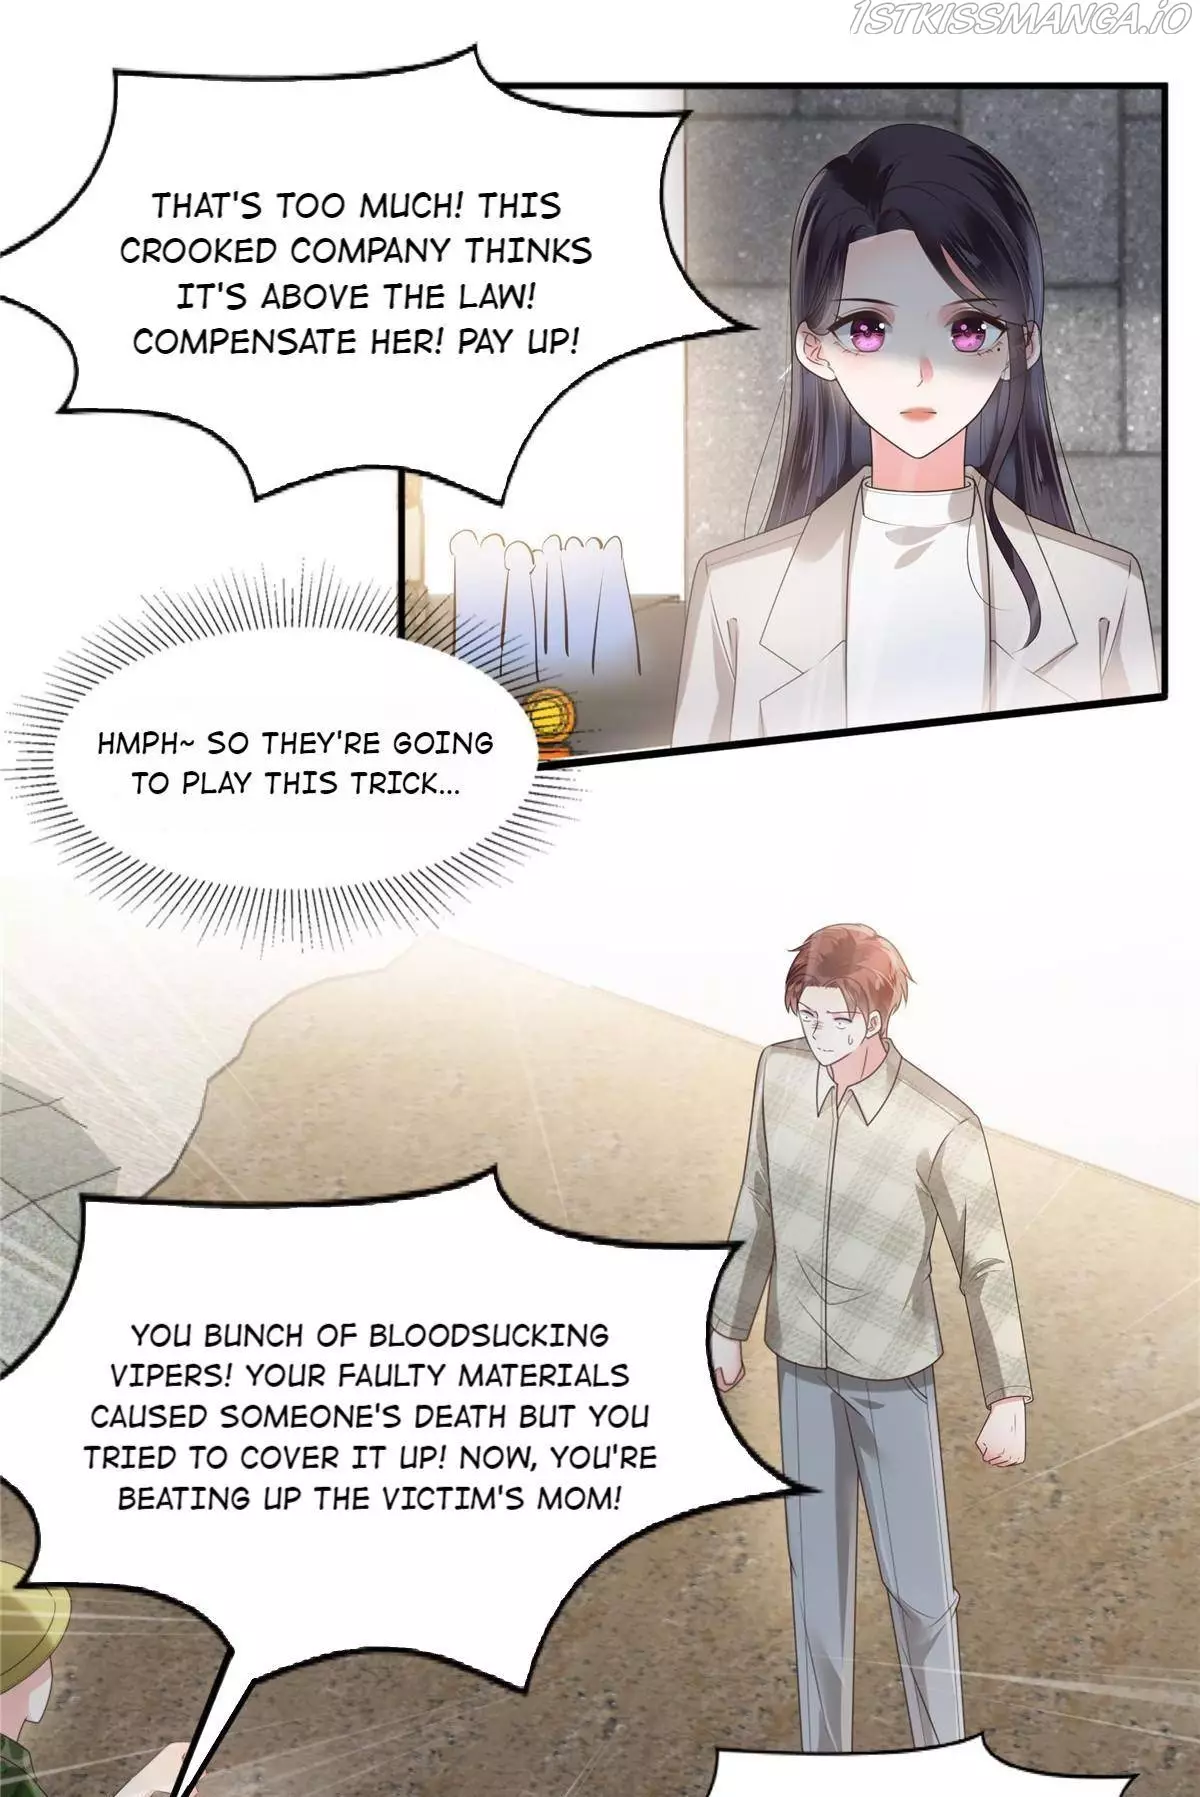 Rebirth Meeting: For You And My Exclusive Lovers - 166 page 6-1b4f4c49